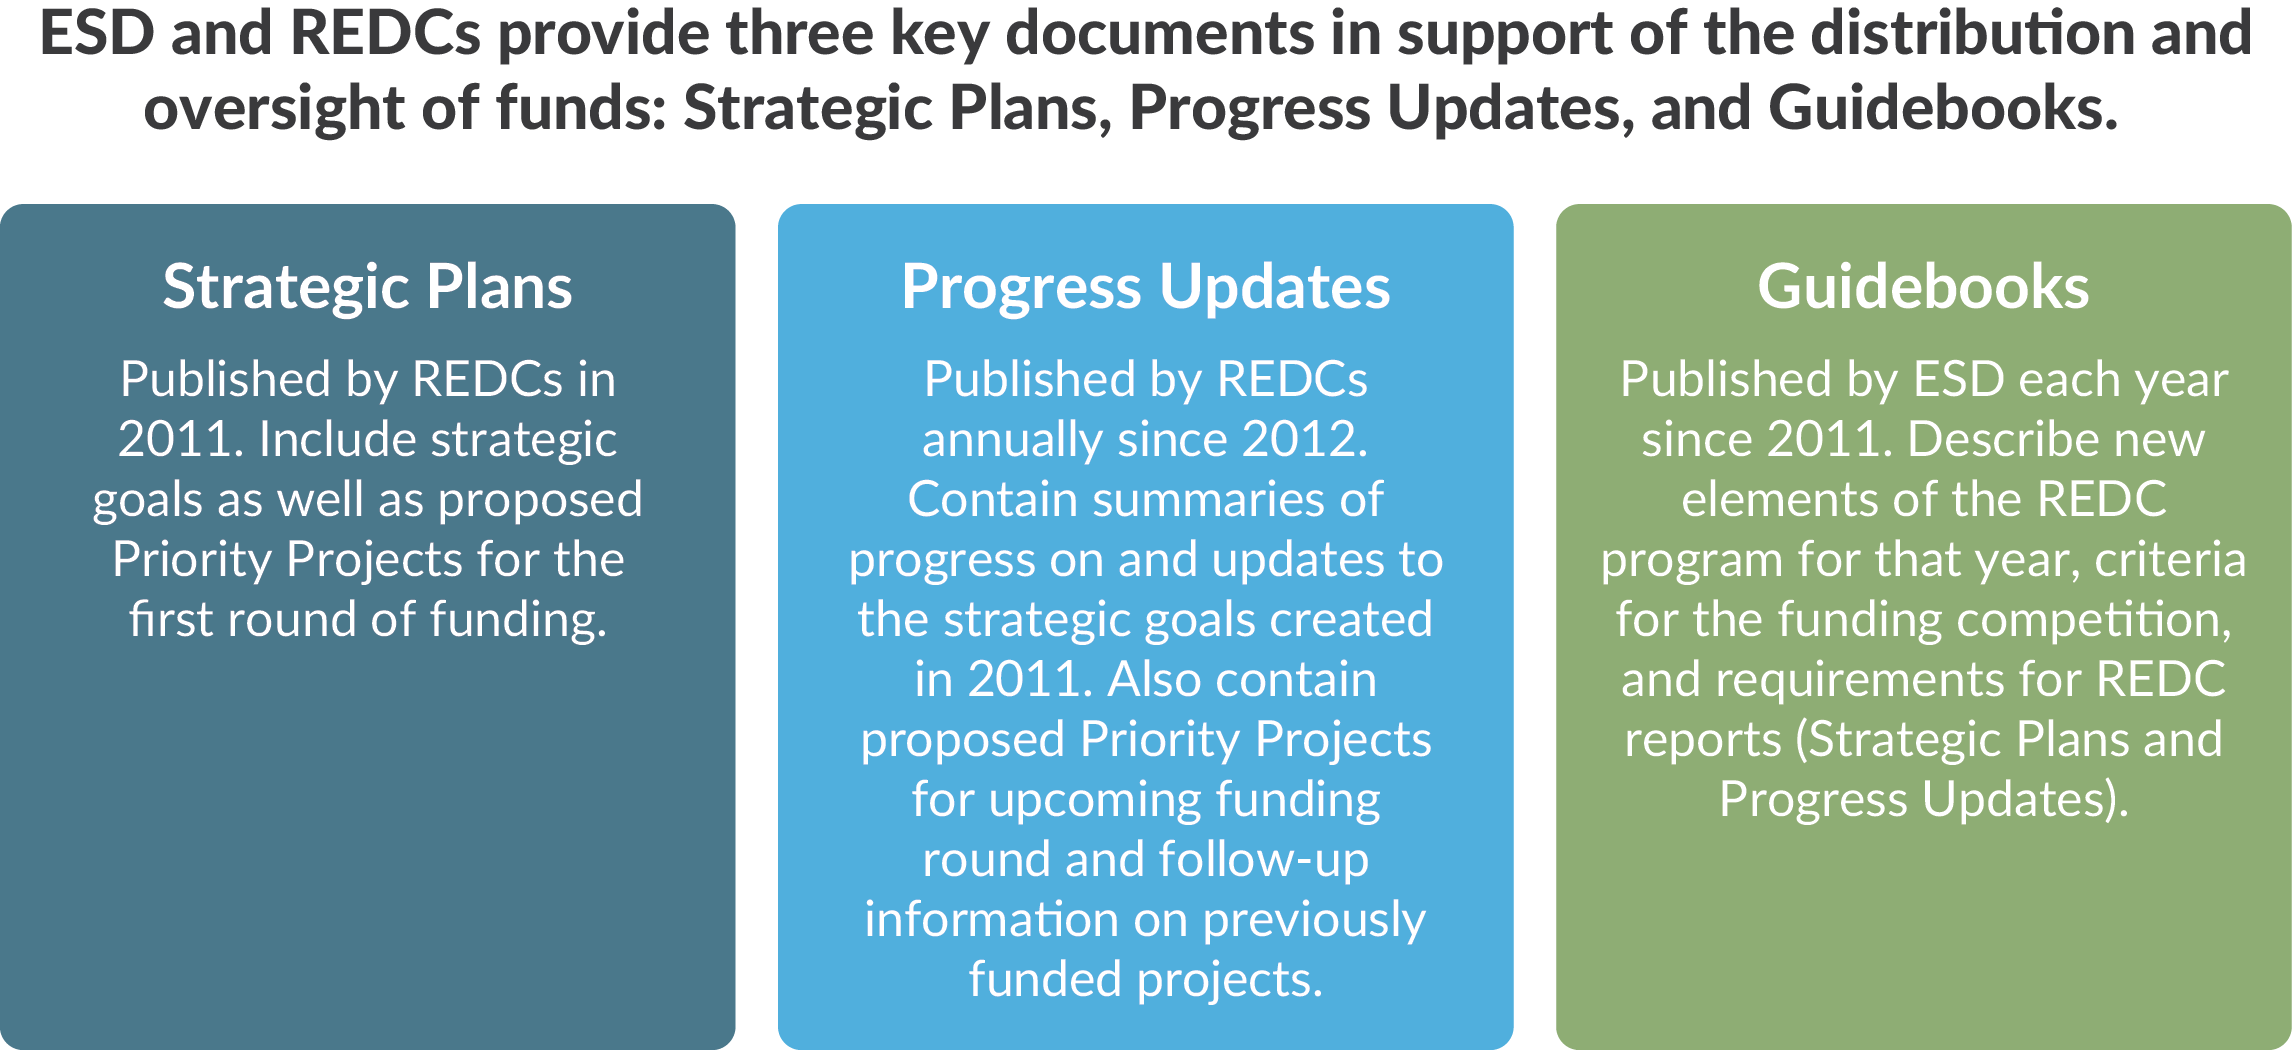 Key documents to support distribution and oversight of funds to New York State Regional Economic Development Councils, strategic plans, progress updates, guidebooks